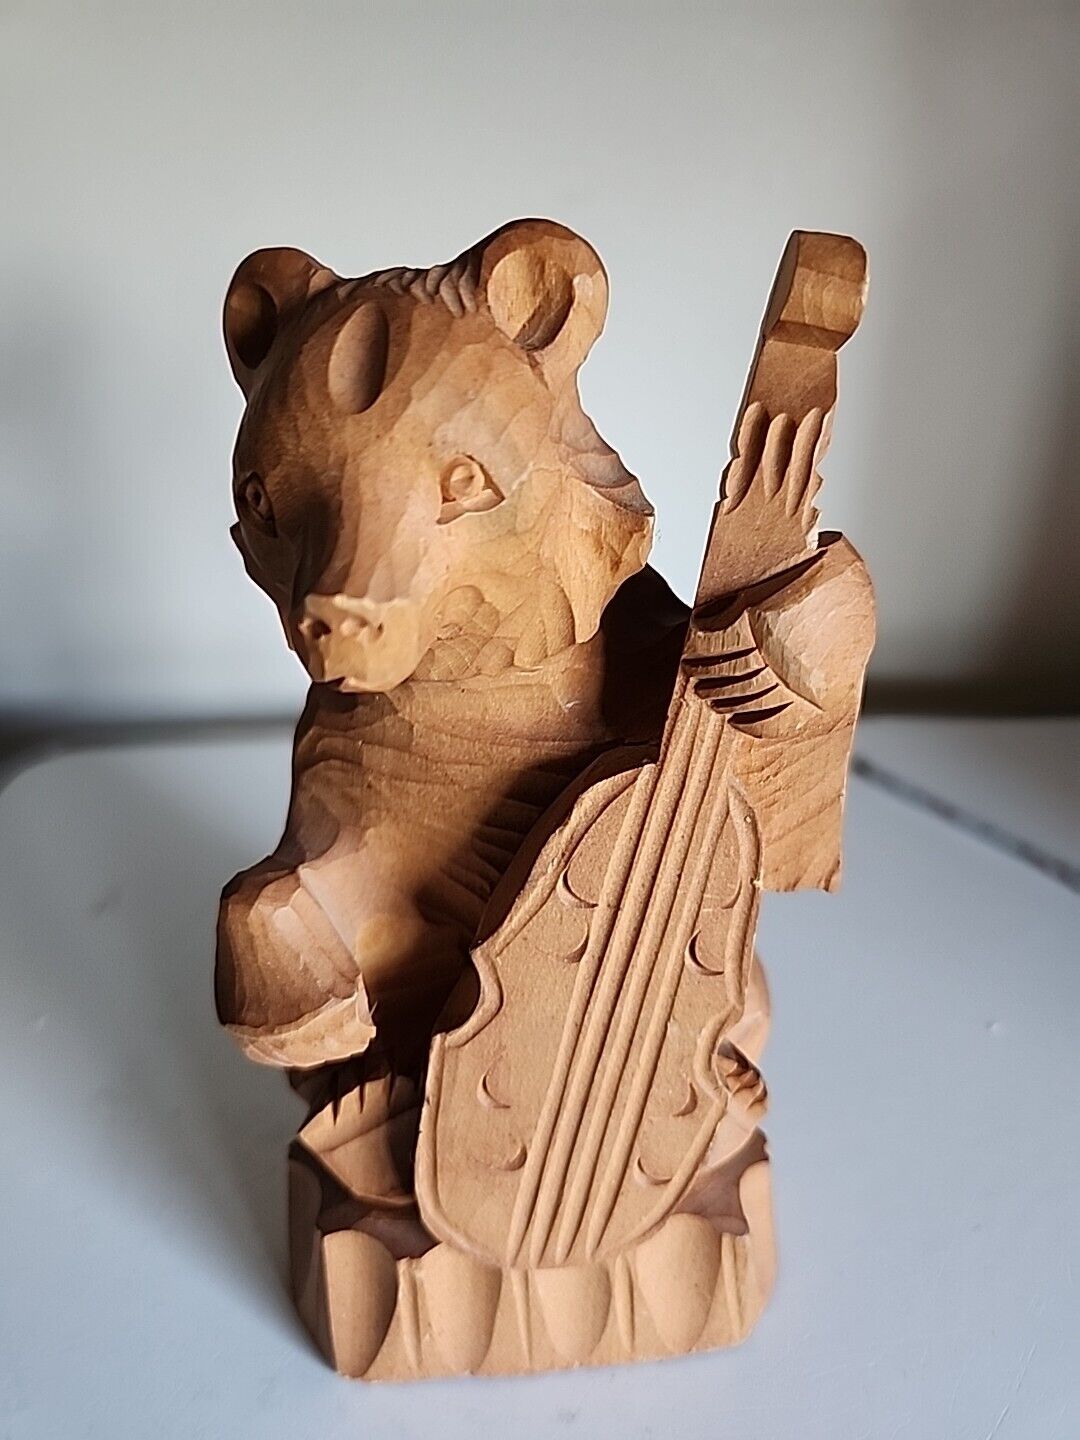 Vintage  Folk Art Carved Wood Bear Russian Playing  Cello Cabin Decor 6.25